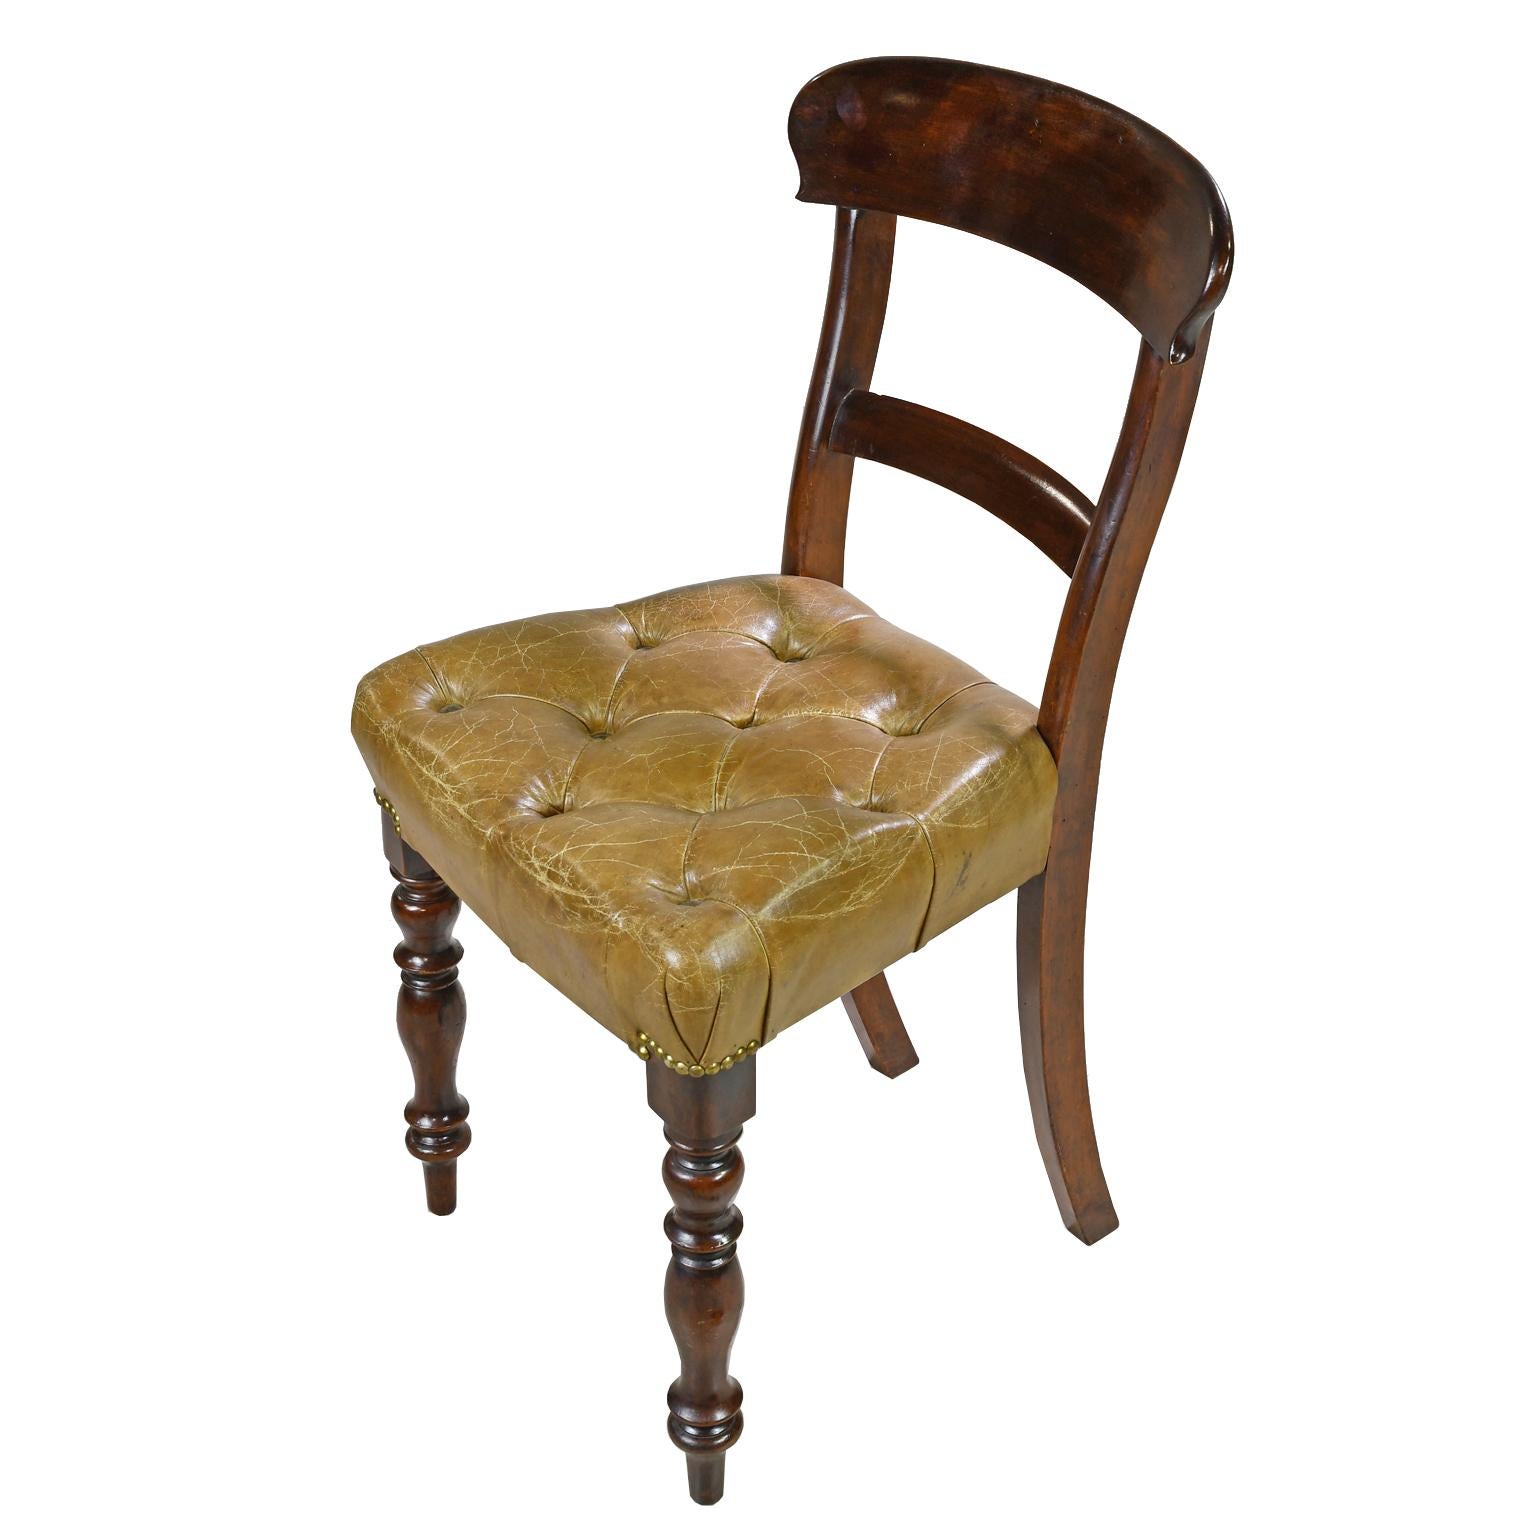 An early Victorian side chair in mahogany with curved top rail, and raised on turned front legs and saber back legs. Seat is upholstered in a tufted, beige/camel-colored leather with brass nailheads, England, circa 1840. Note: A pair of side chairs